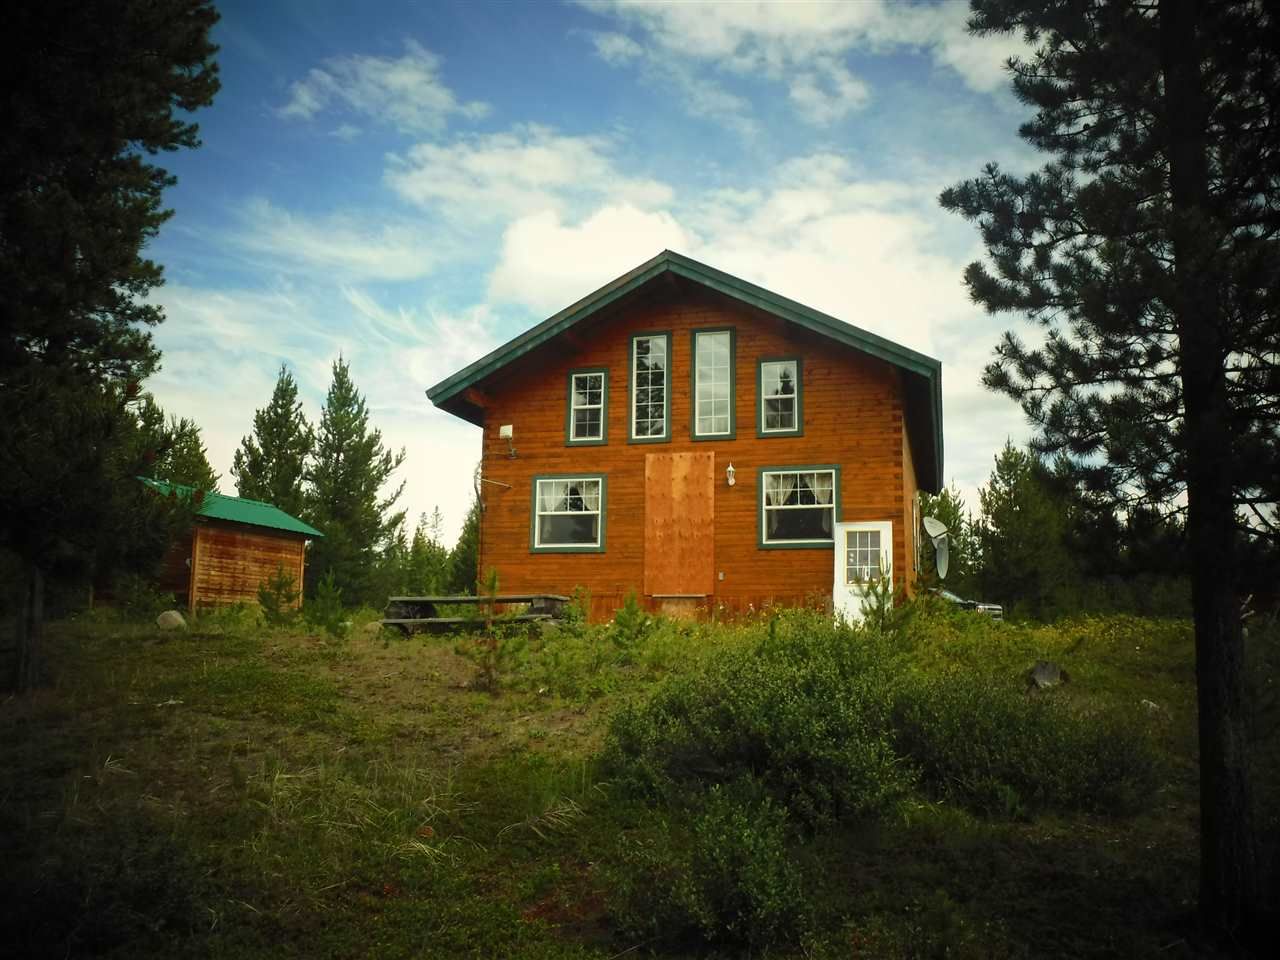 Main Photo: 2286 DORSEY ROAD in : Chilcotin House for sale : MLS®# R2149229